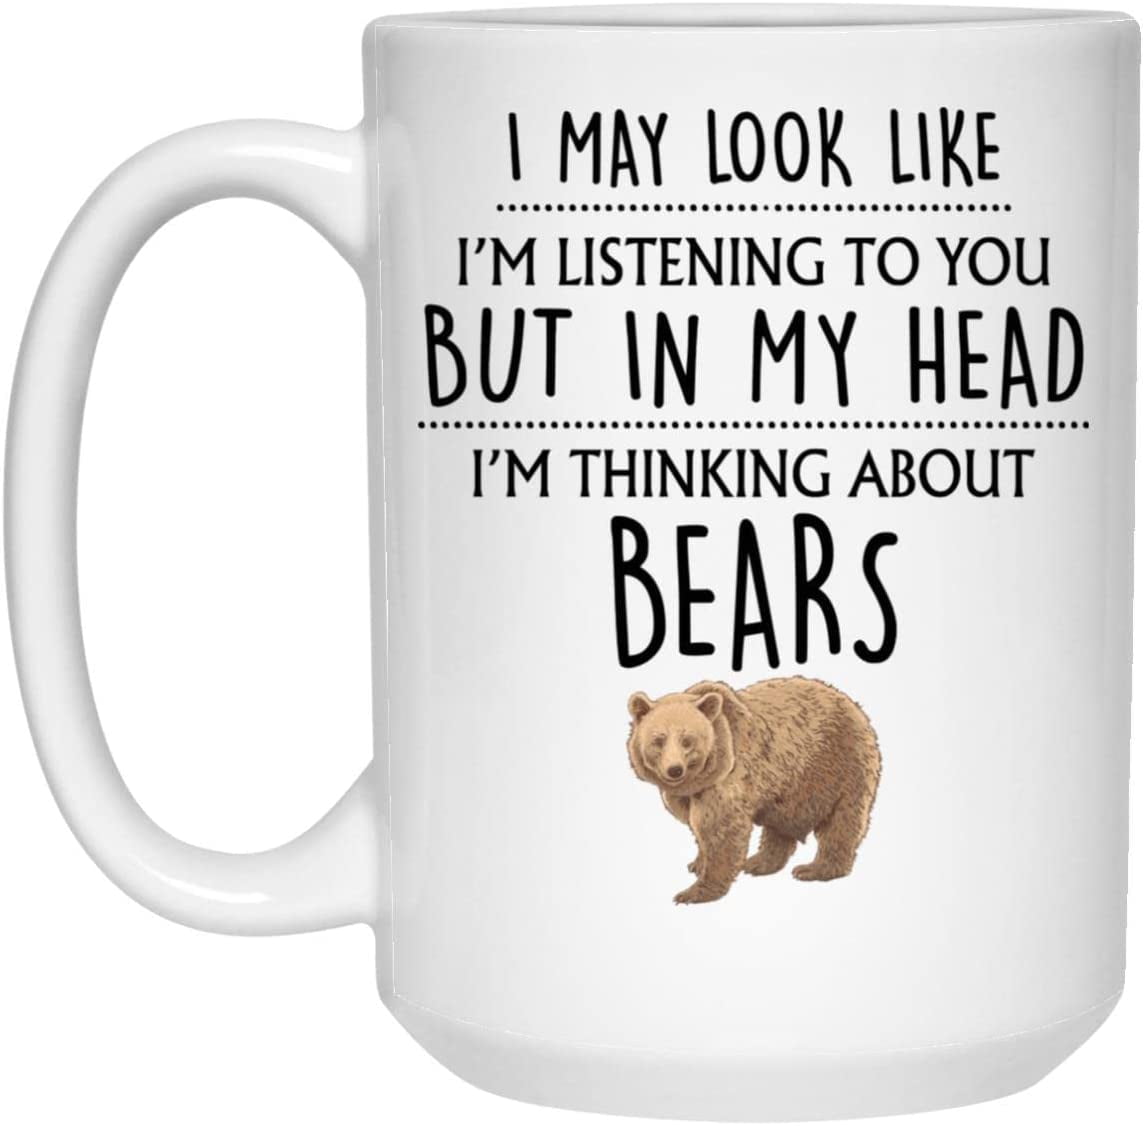 Bear Coffee Mug, Cute Brown Bear Gift, Wild Animal Lover, Funny Wildlife  Nature, Zoo Keeper, Zoologist, Grizzly Bear, Woodland 